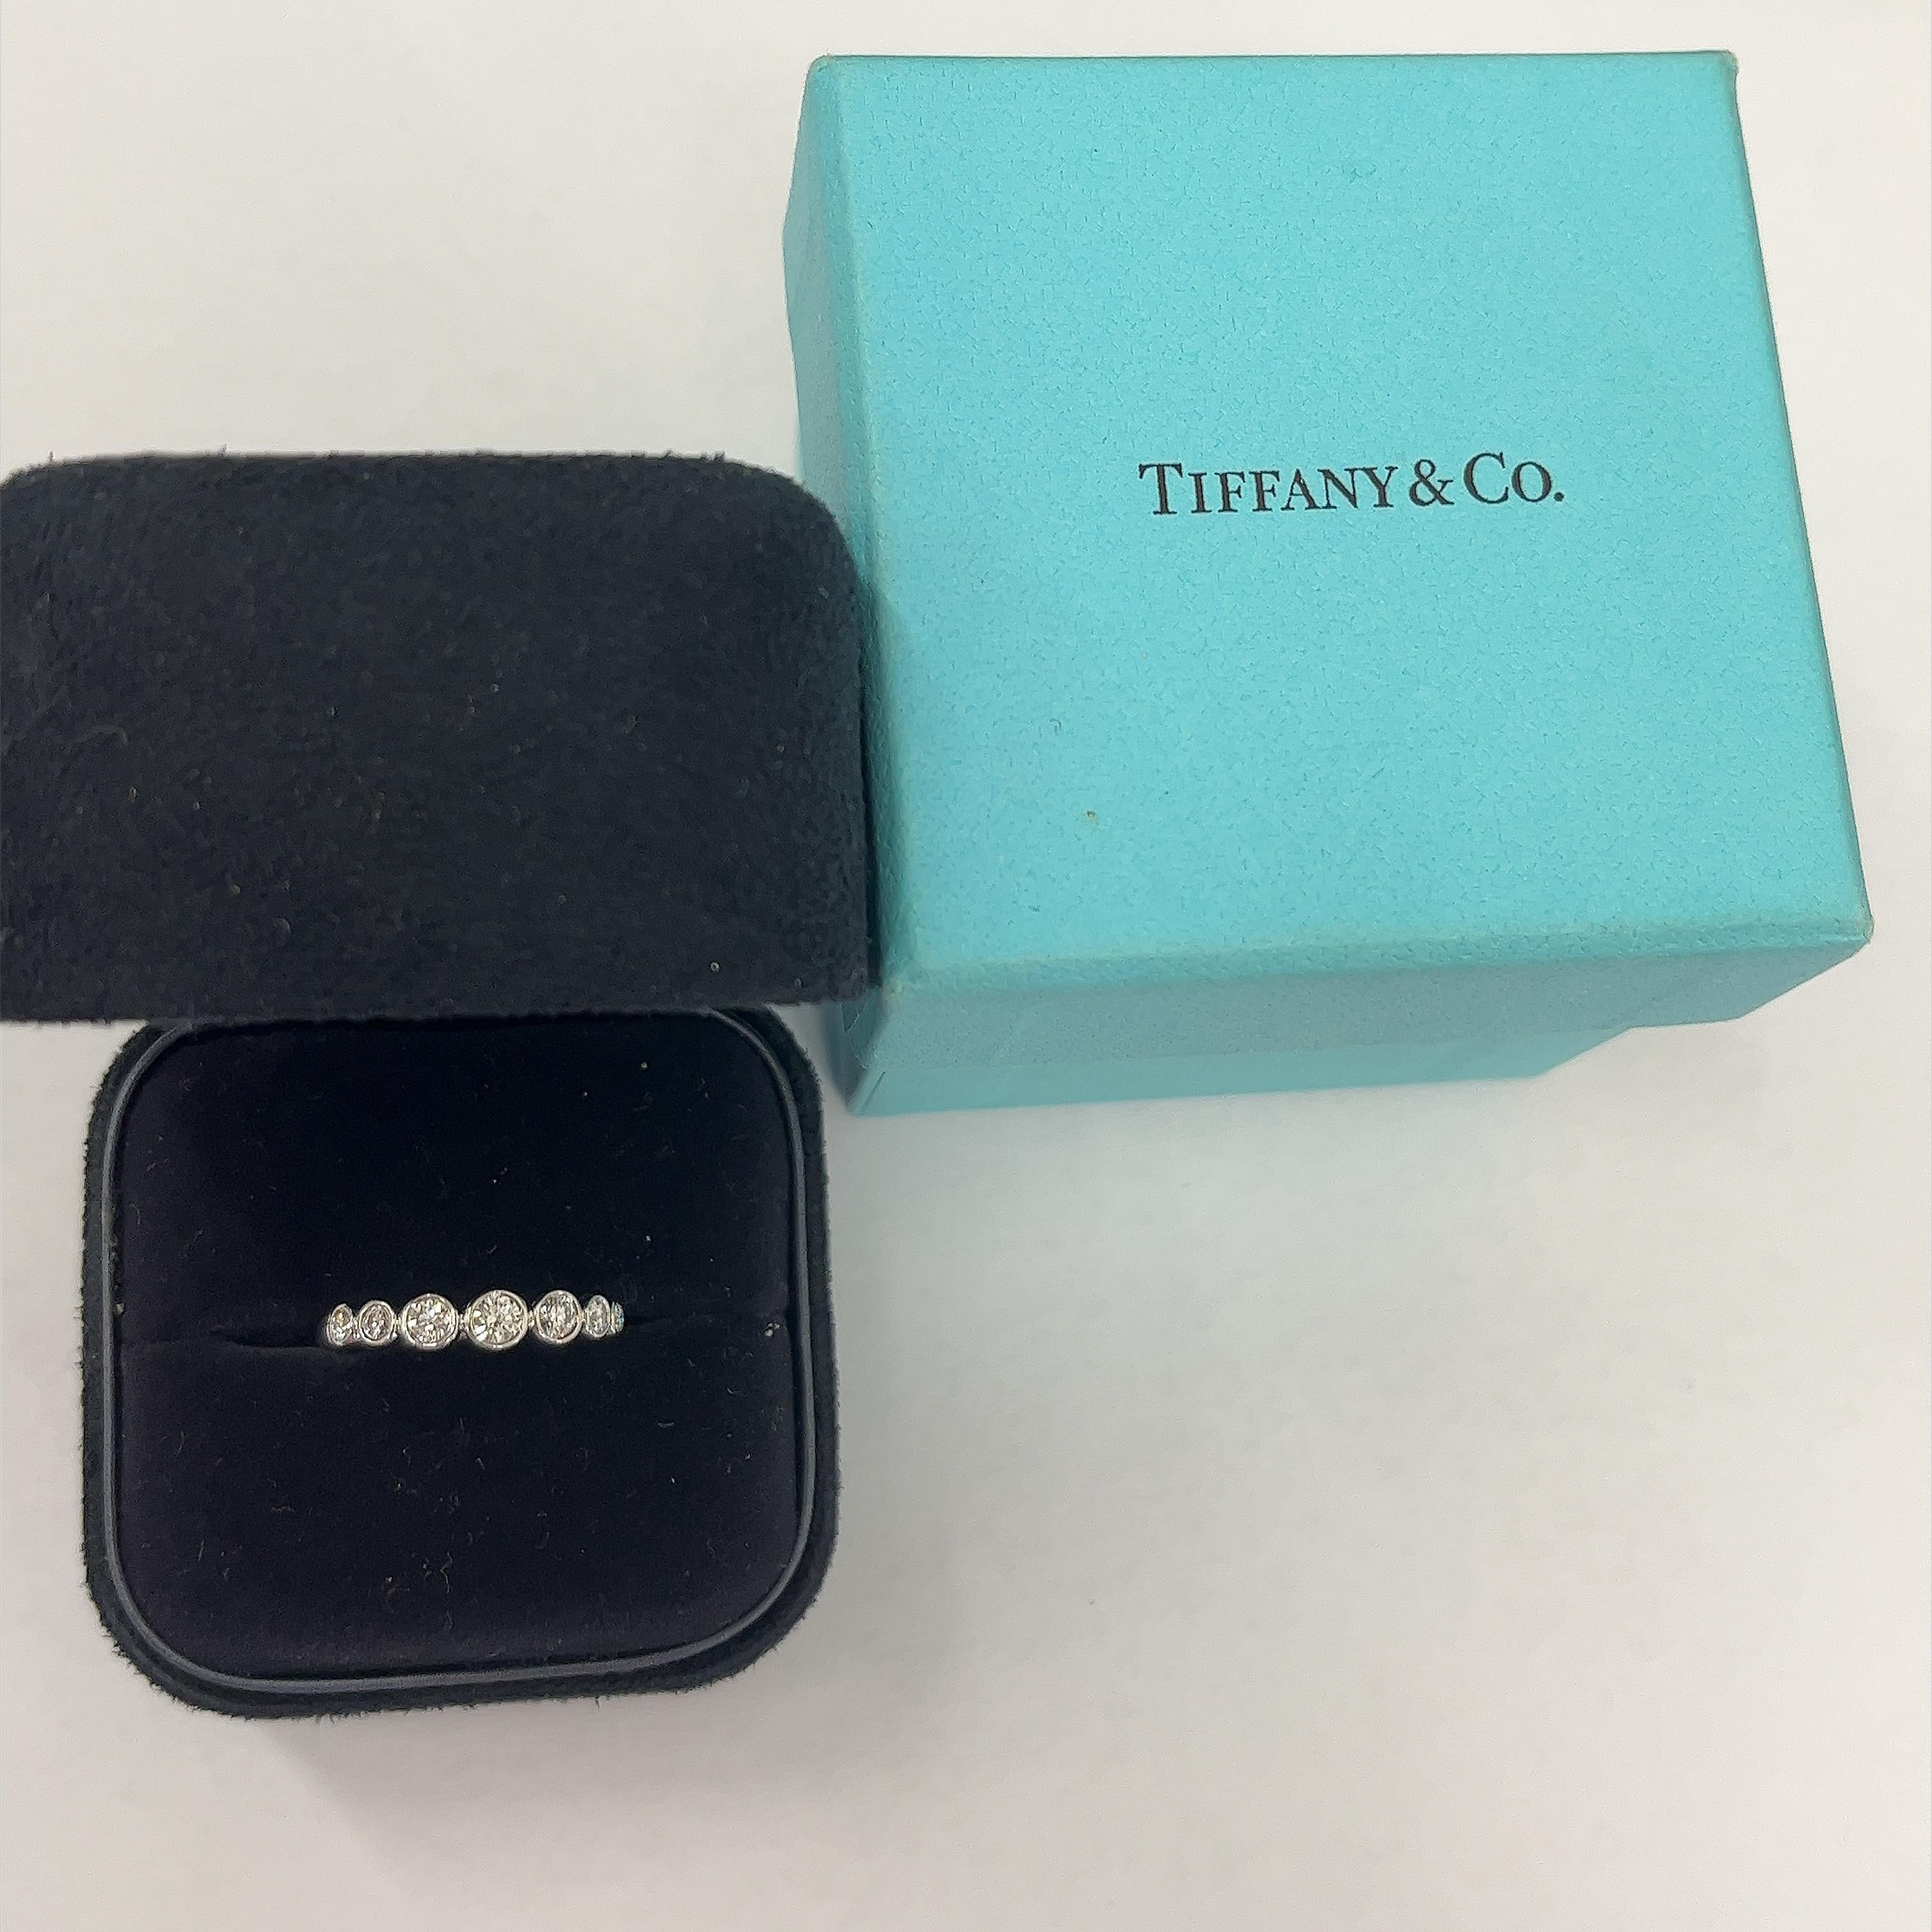 Tiffany & Co Jazz Diamond Ring set with 7 stones in a graduated setting in plat For Sale 1